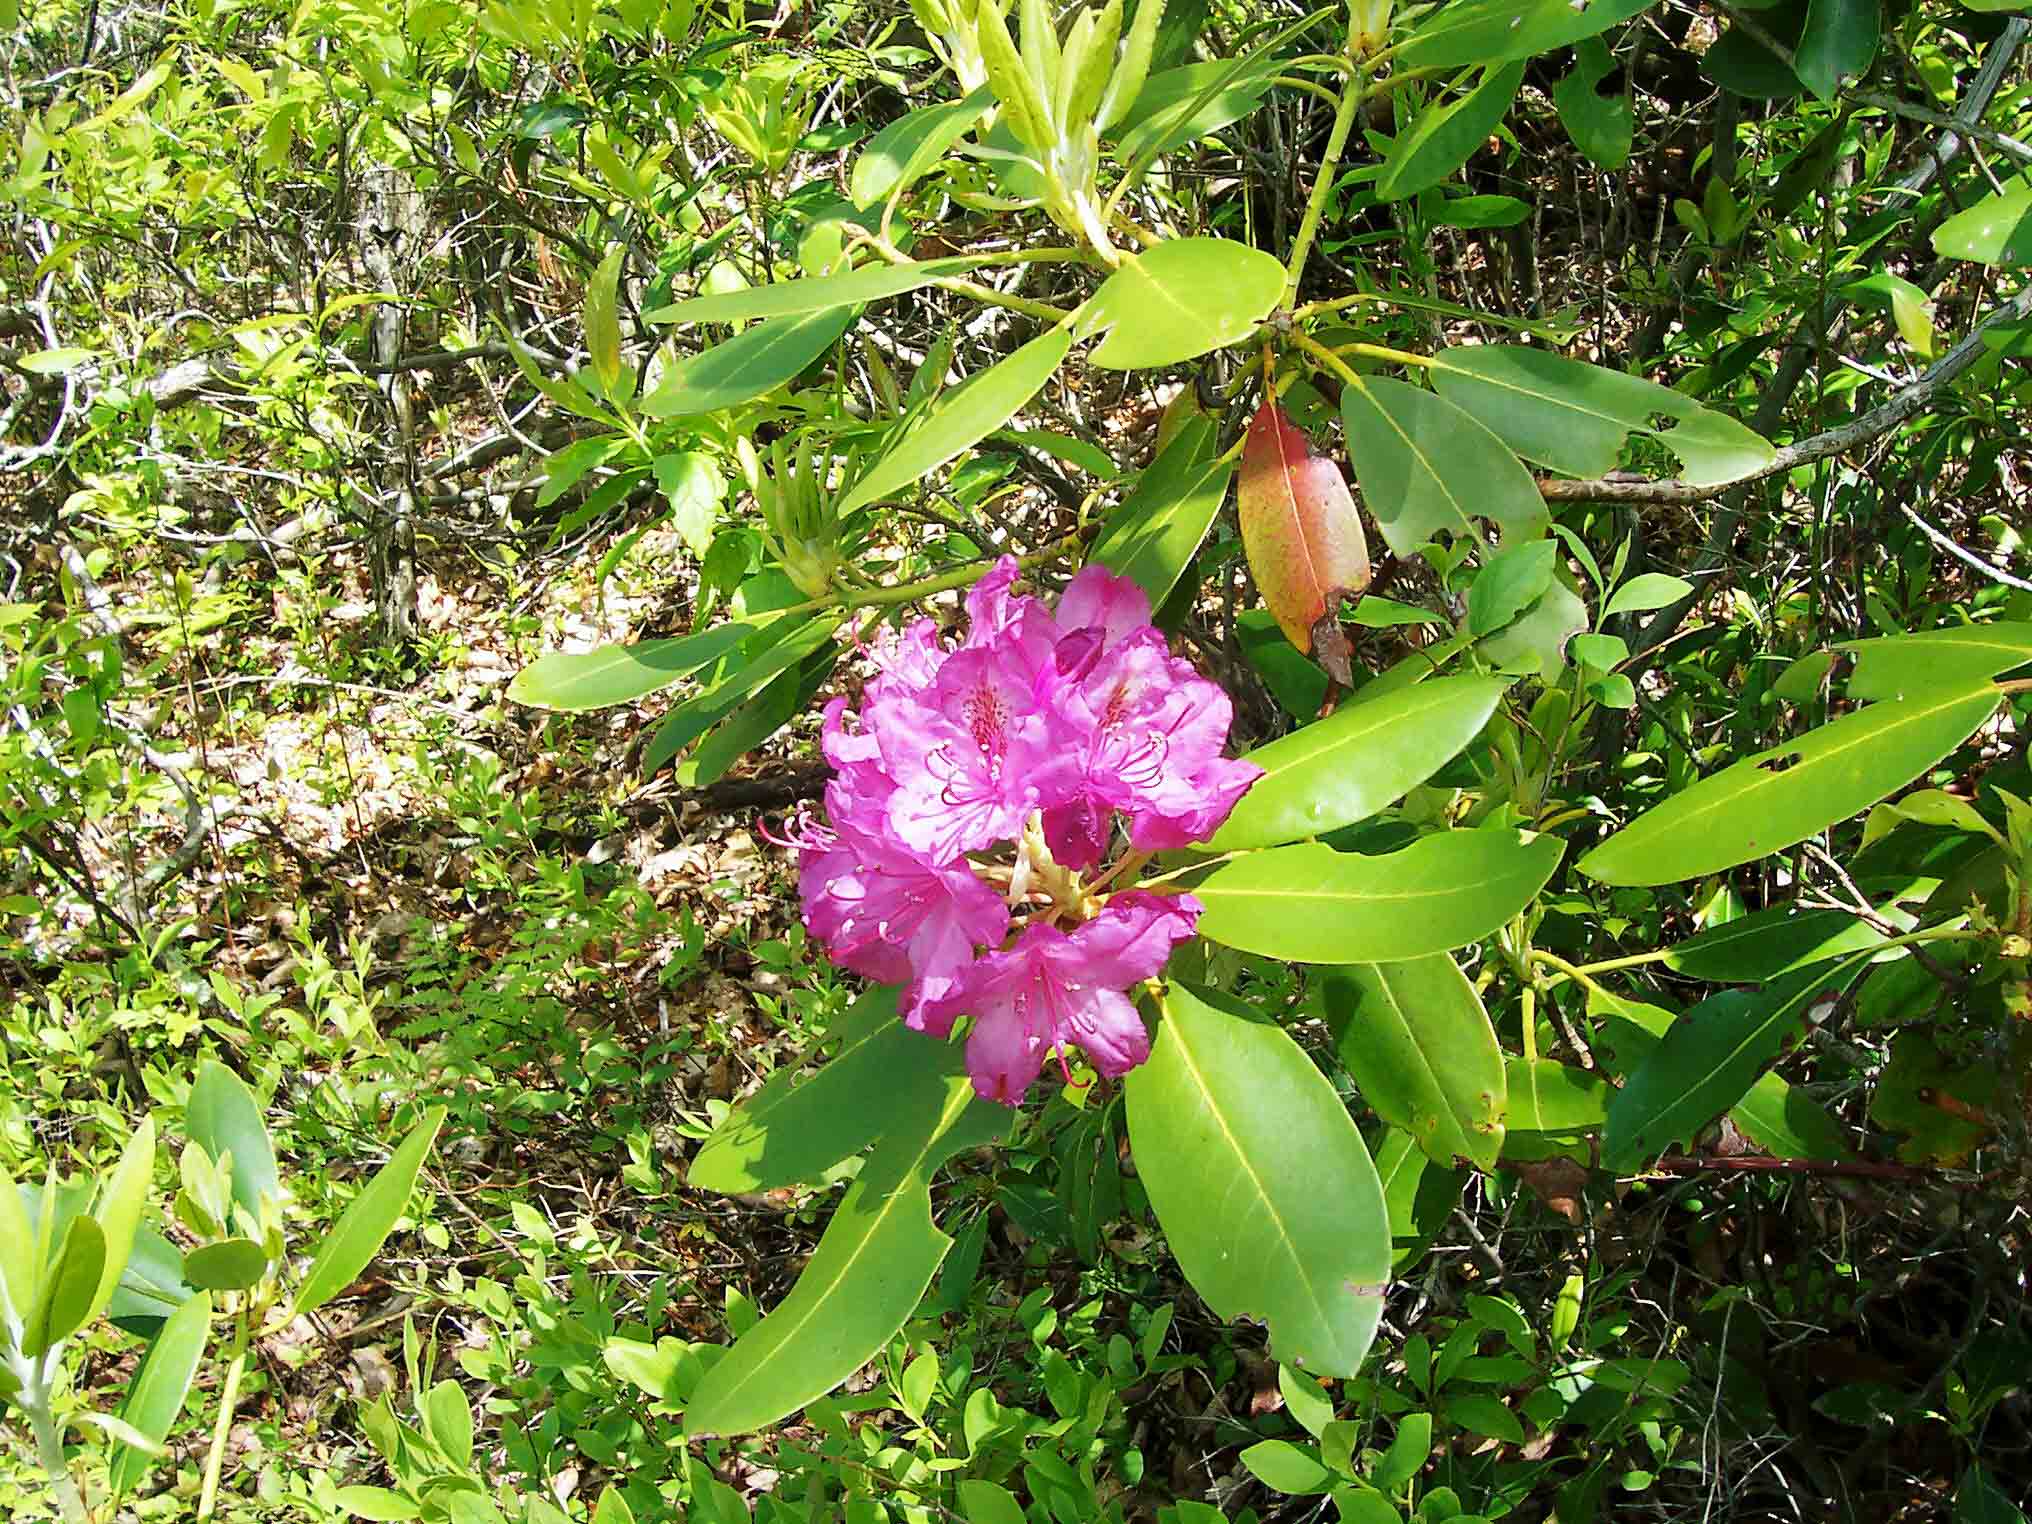 Rhododendron Bloom. Taken at approx. MM 13.3.  Courtesy dlcul@conncoll.edu